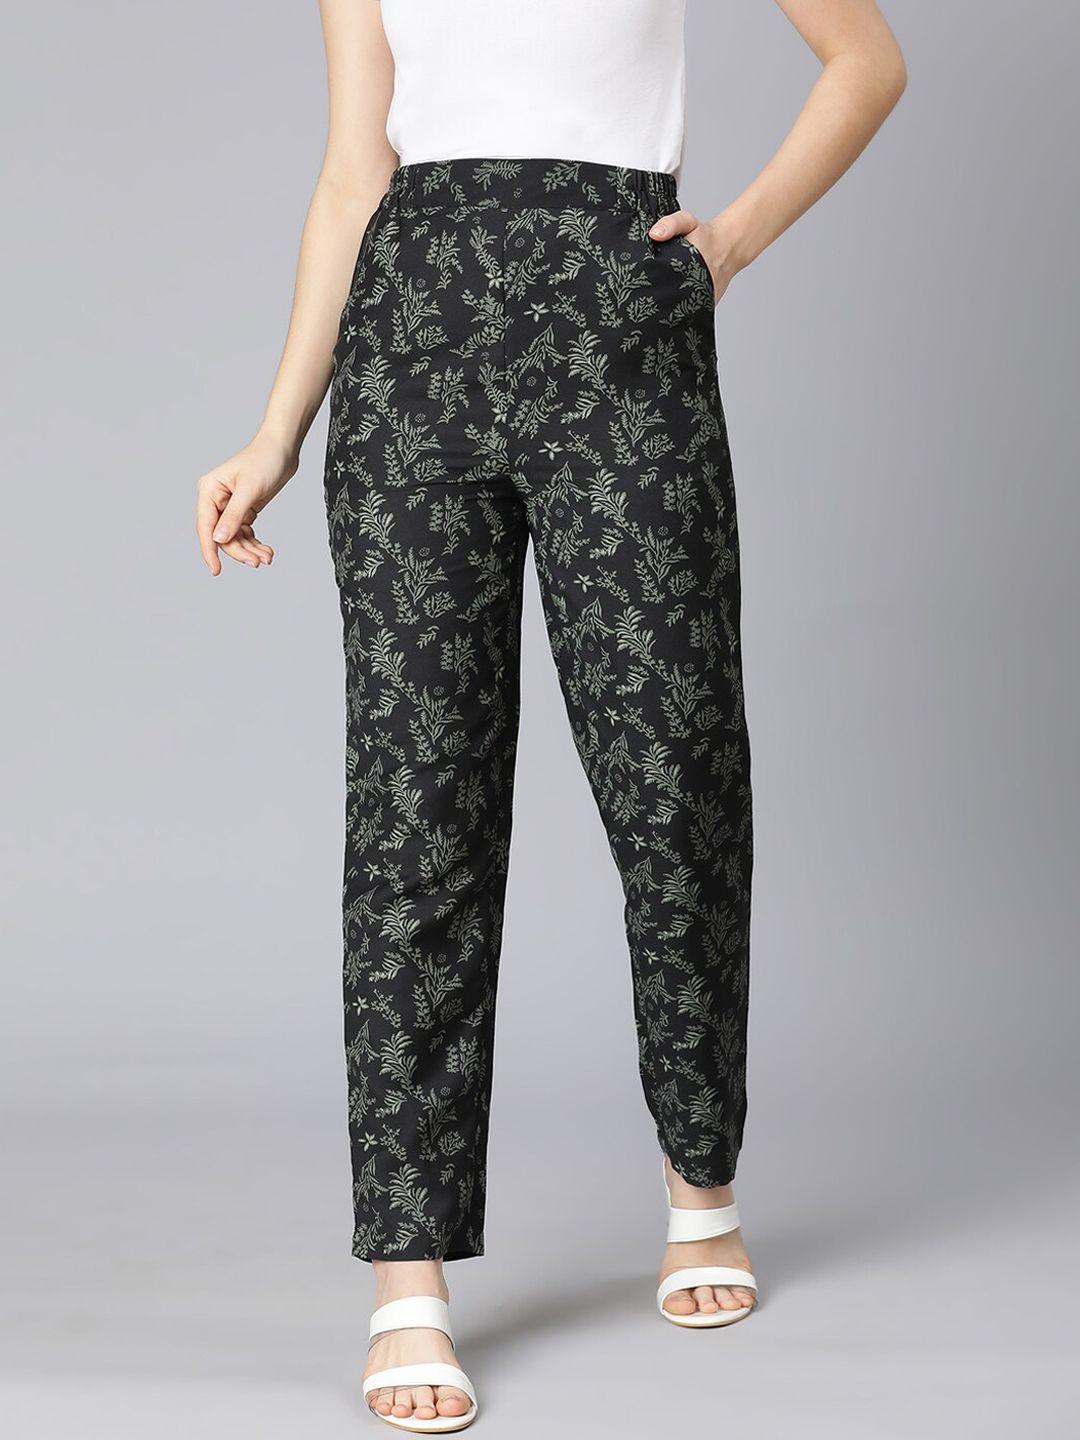 oxolloxo-women-green-floral-printed-trousers